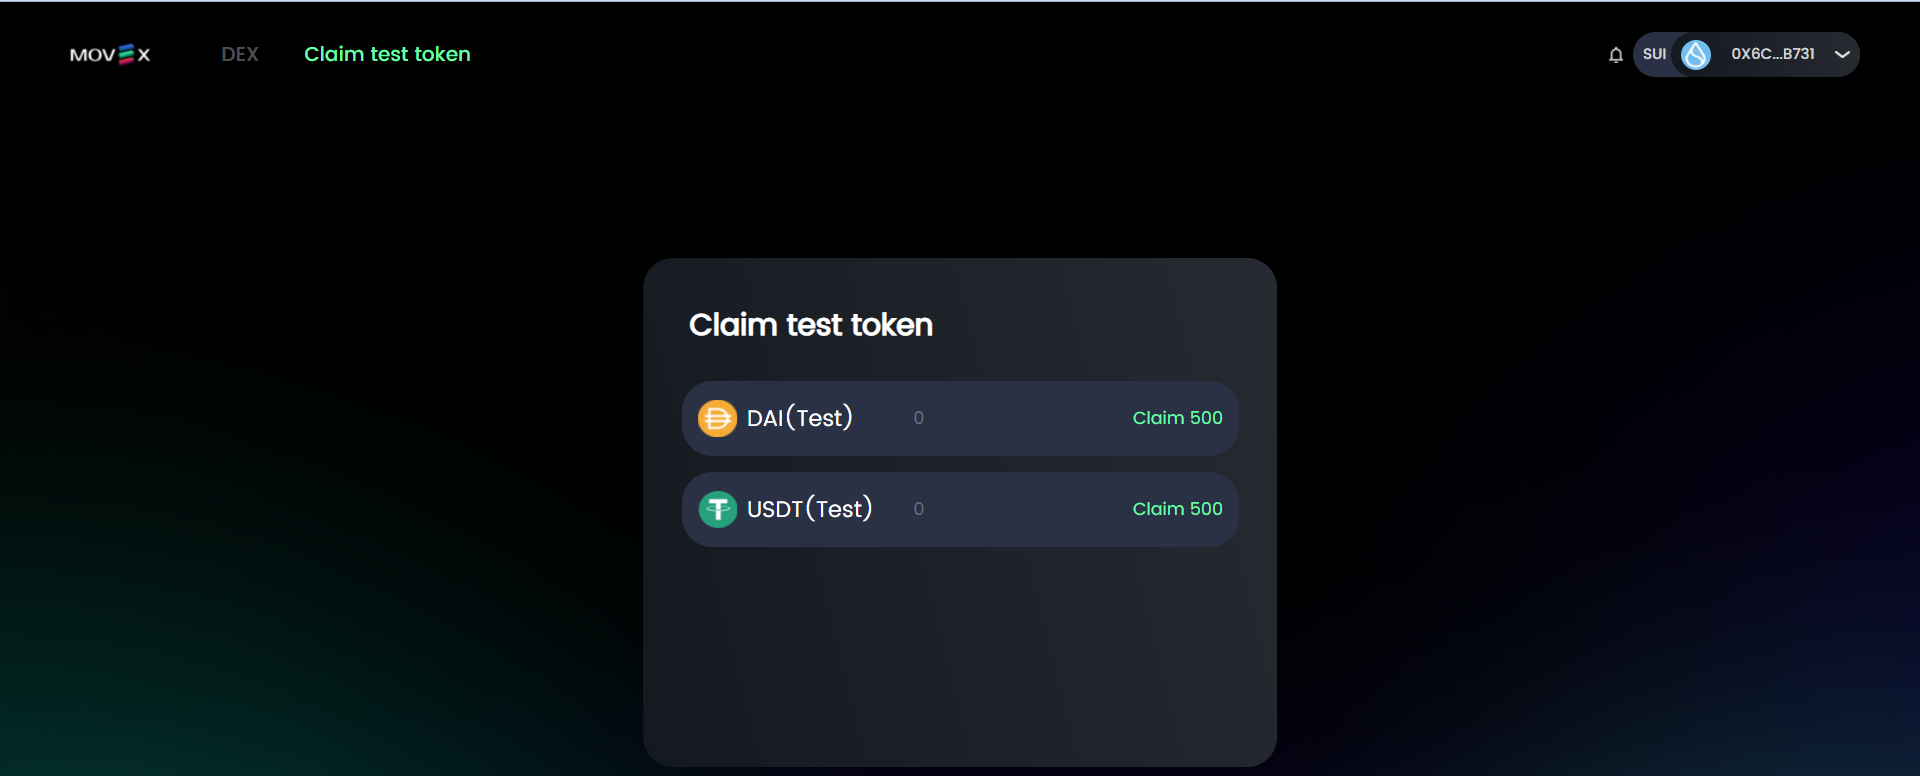 Go to the "Claim test token" tab. Claim all test tokens.